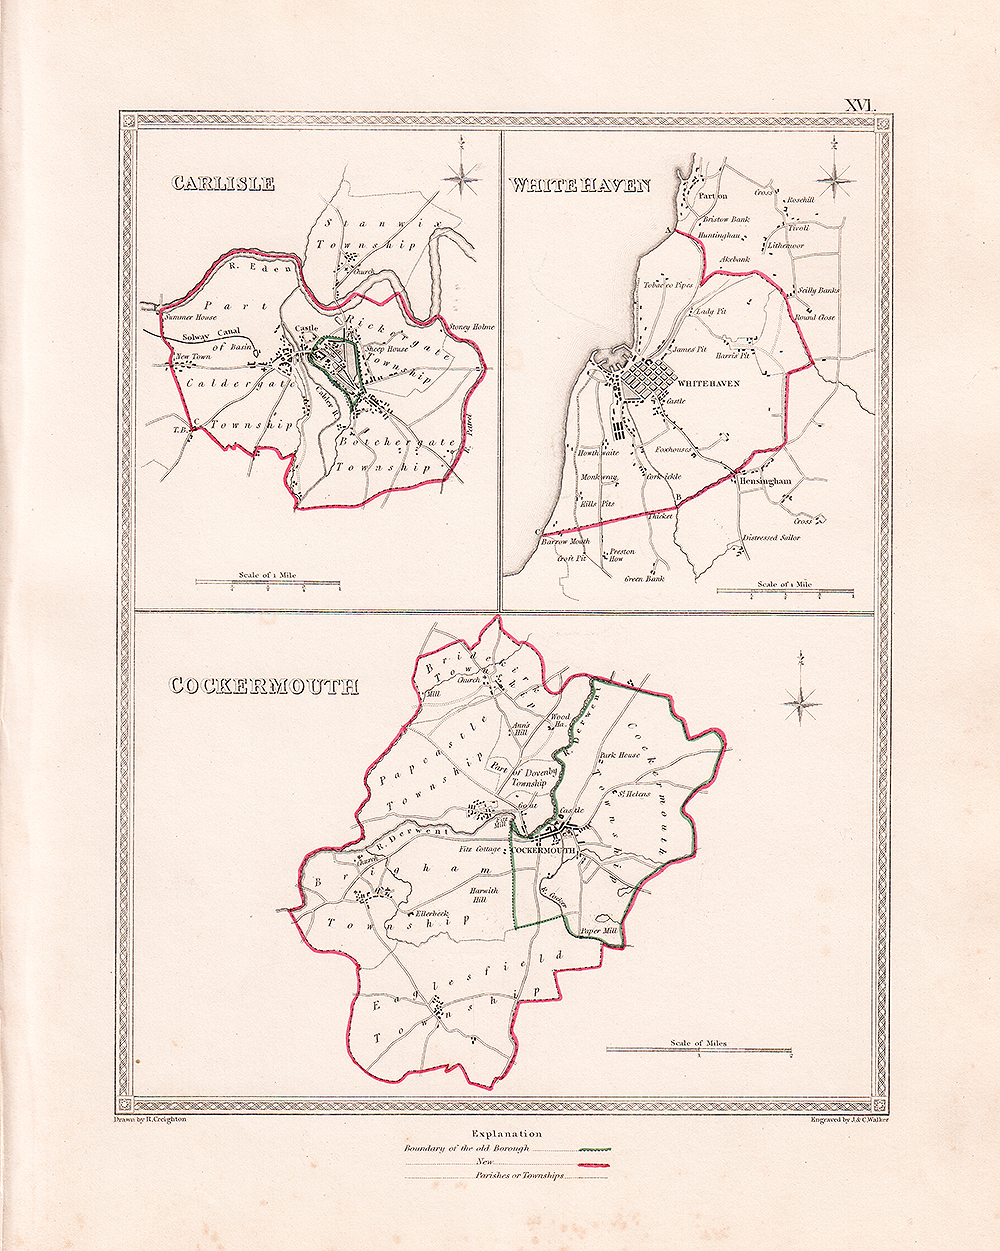 J. and C. Walker - Carlisle, White Haven and Cockermouth.